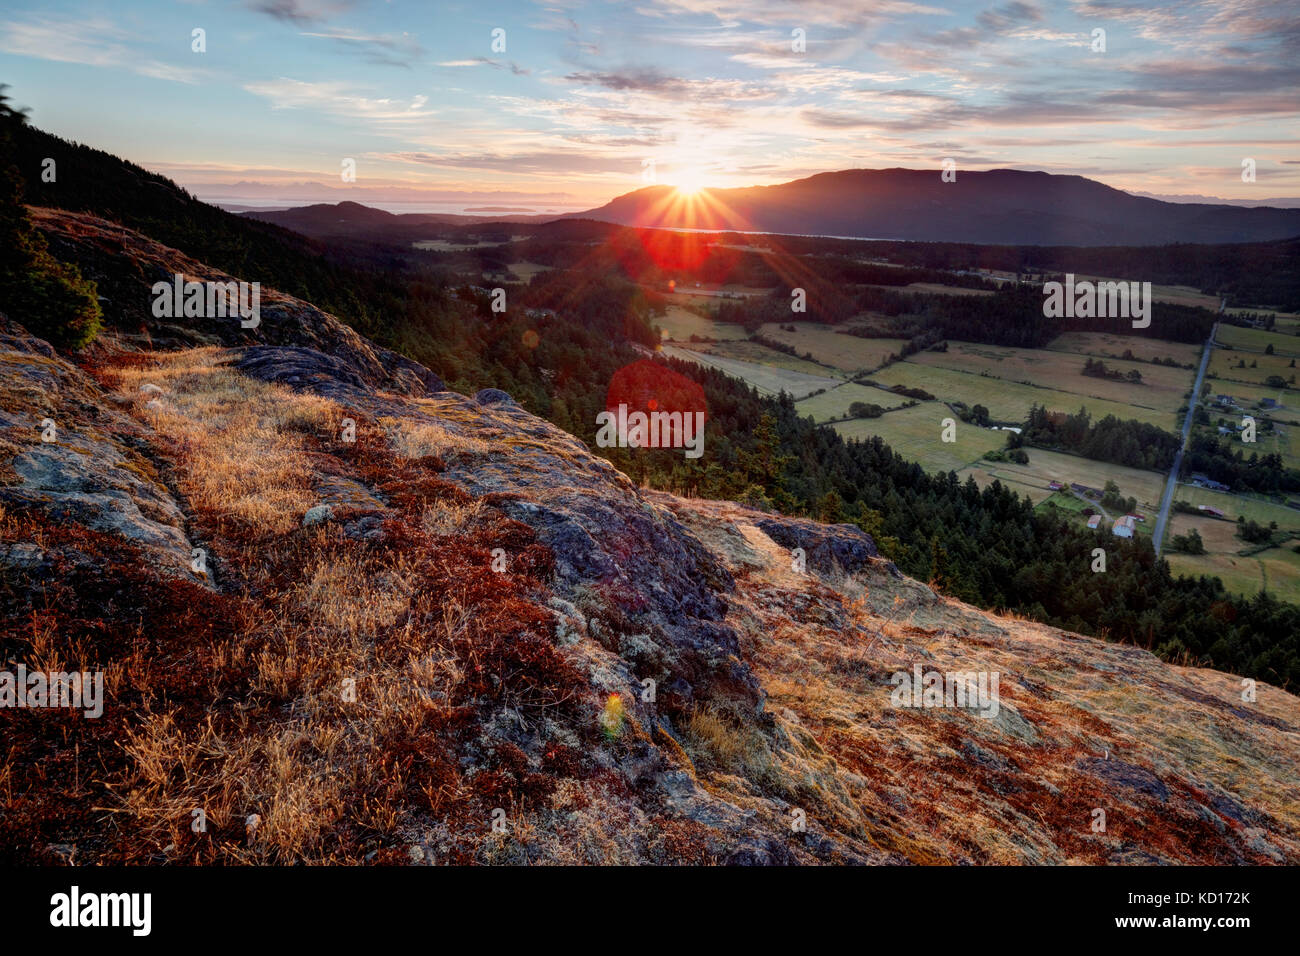 The sun rises over the Mount Constitution and the Crow Valley, viewed from Ship Peak on Turtleback Mountain, Orcas Island, Washington, USA Stock Photo